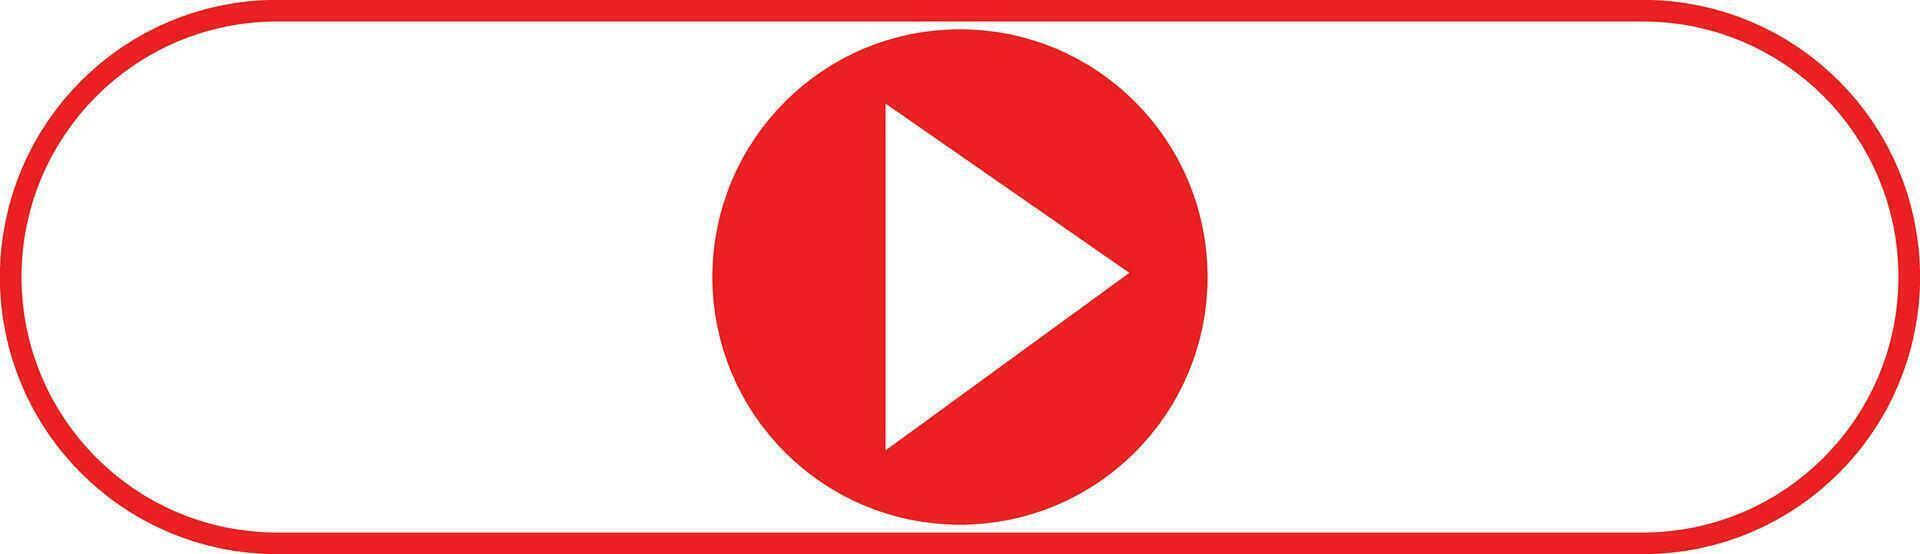 Live video streaming template, play button shape vector